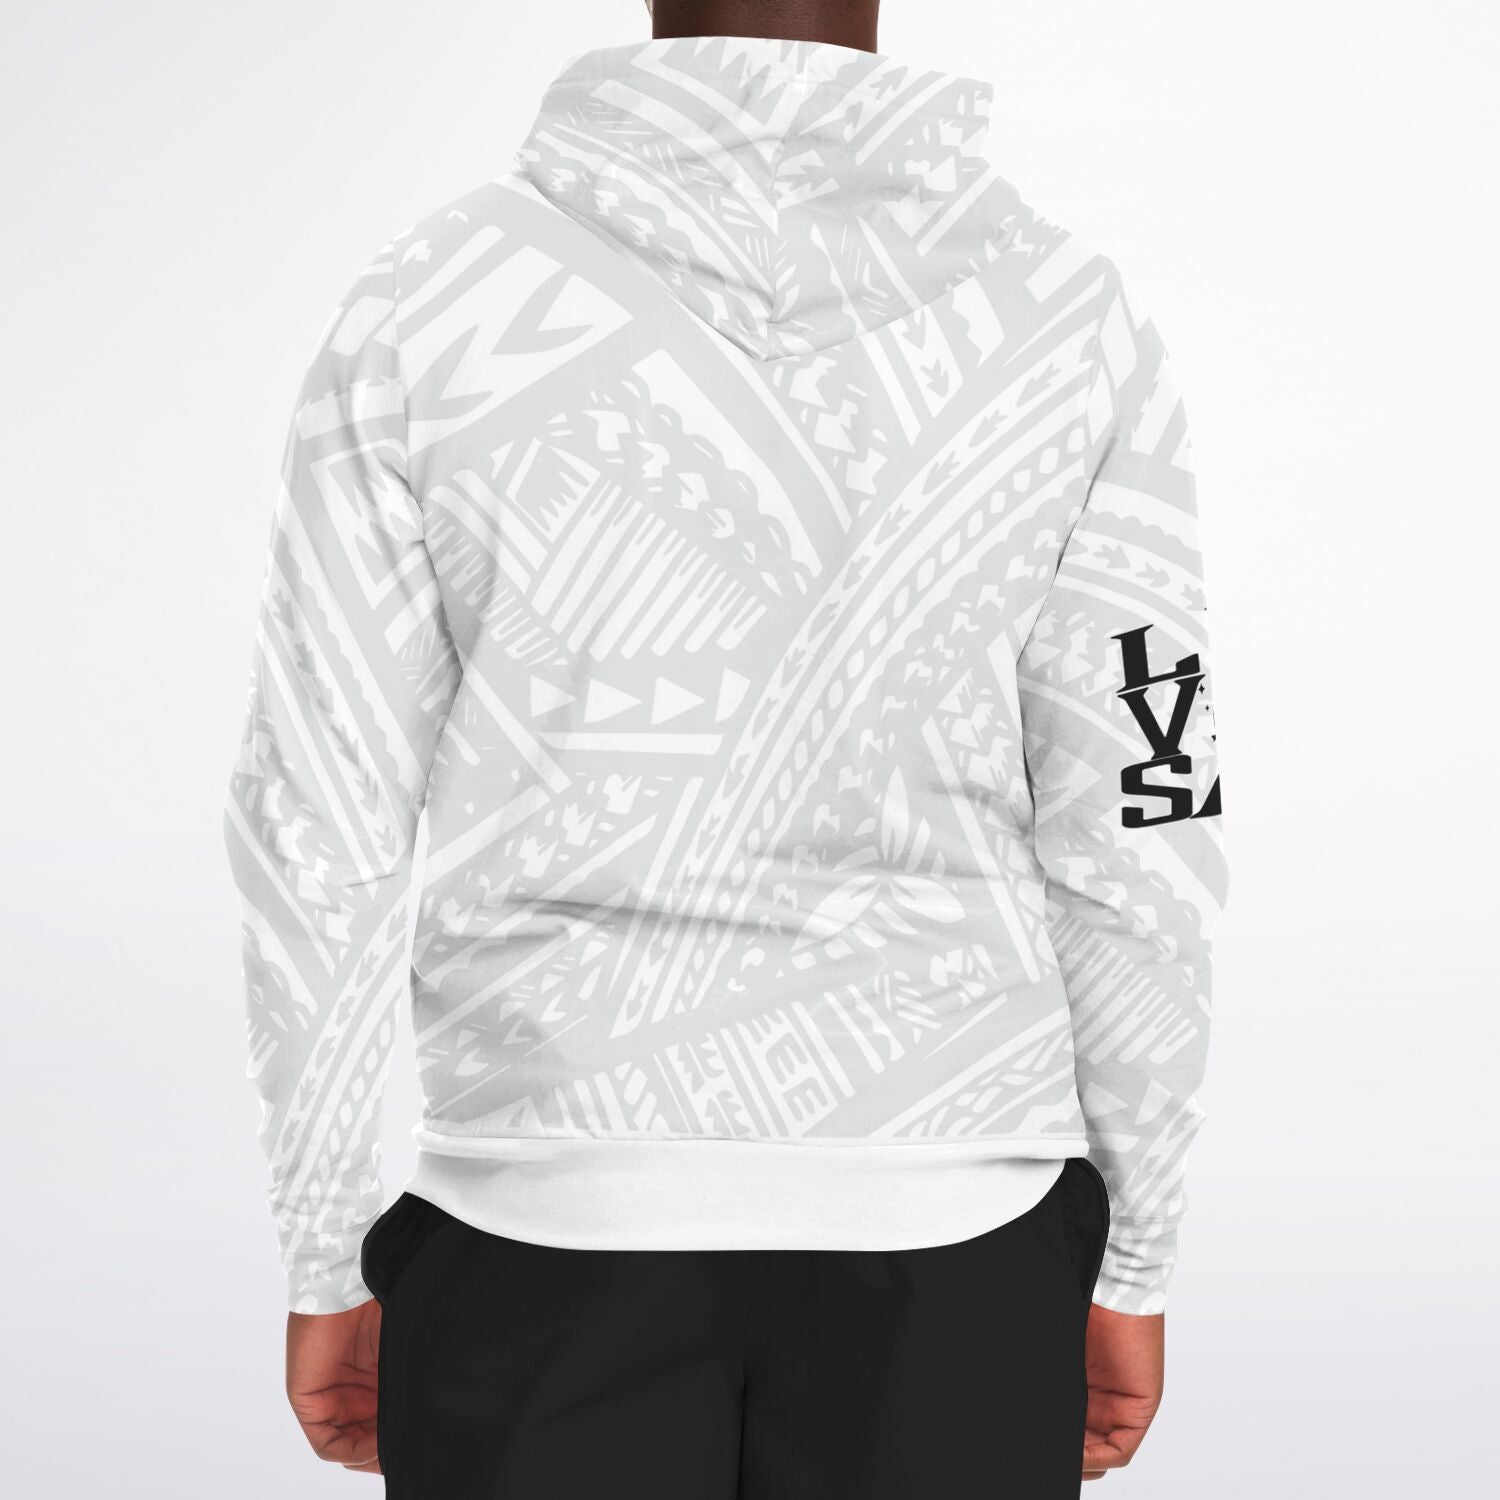 THE SOUTH PACIFIC ALL-OVER PRINT ZIP-UP Hoodie